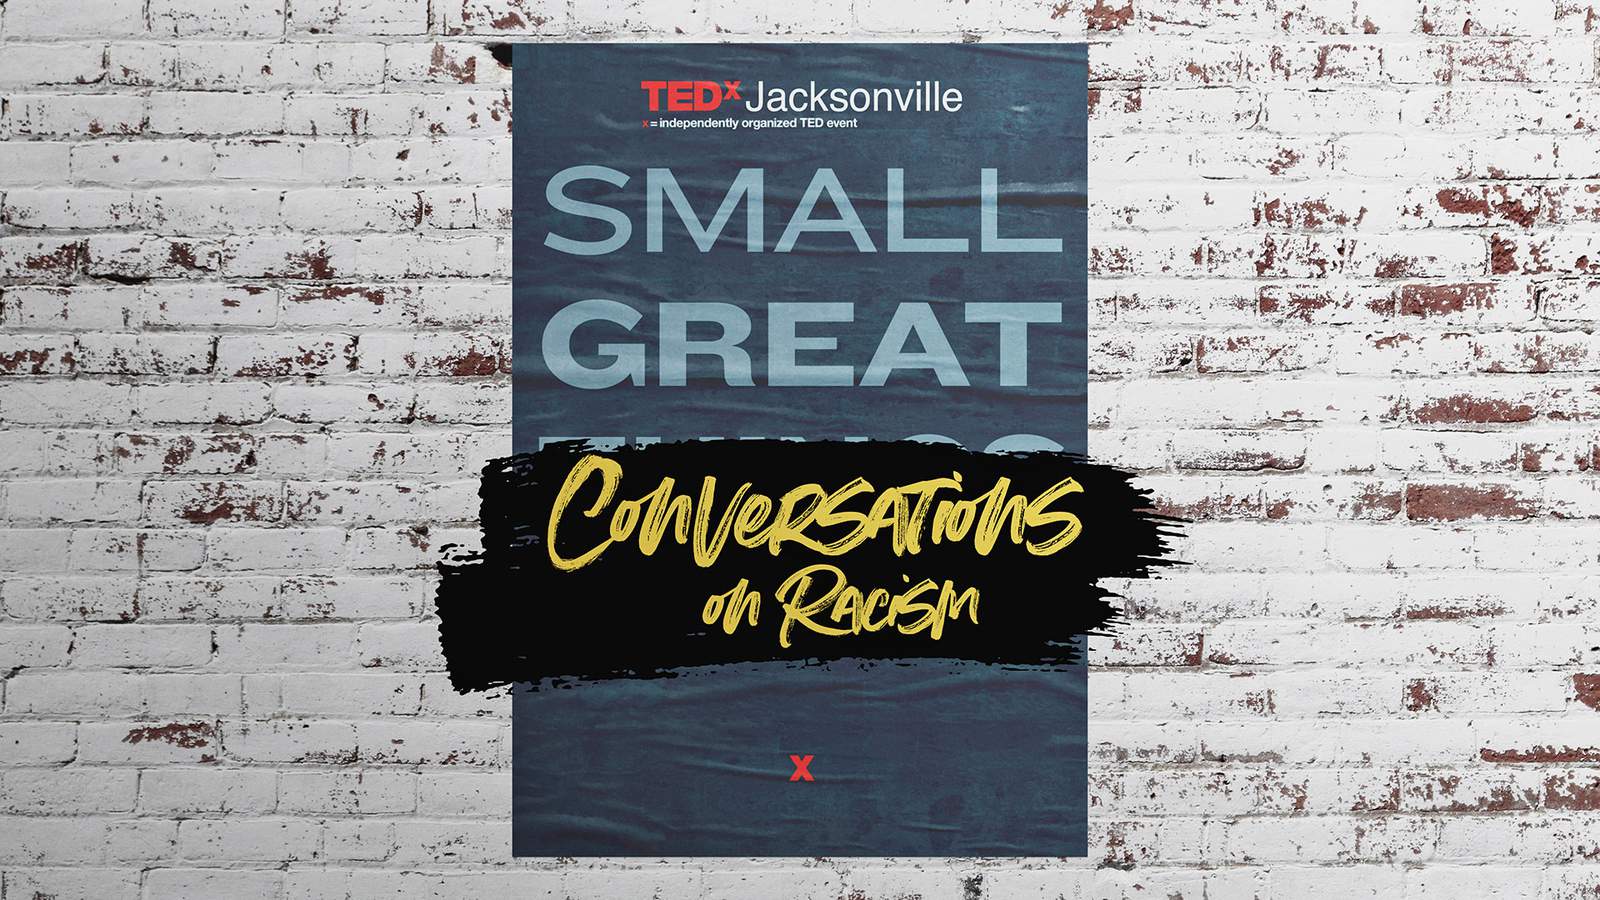 TEDxJacksonville hosts Small Great Conversations on Racism